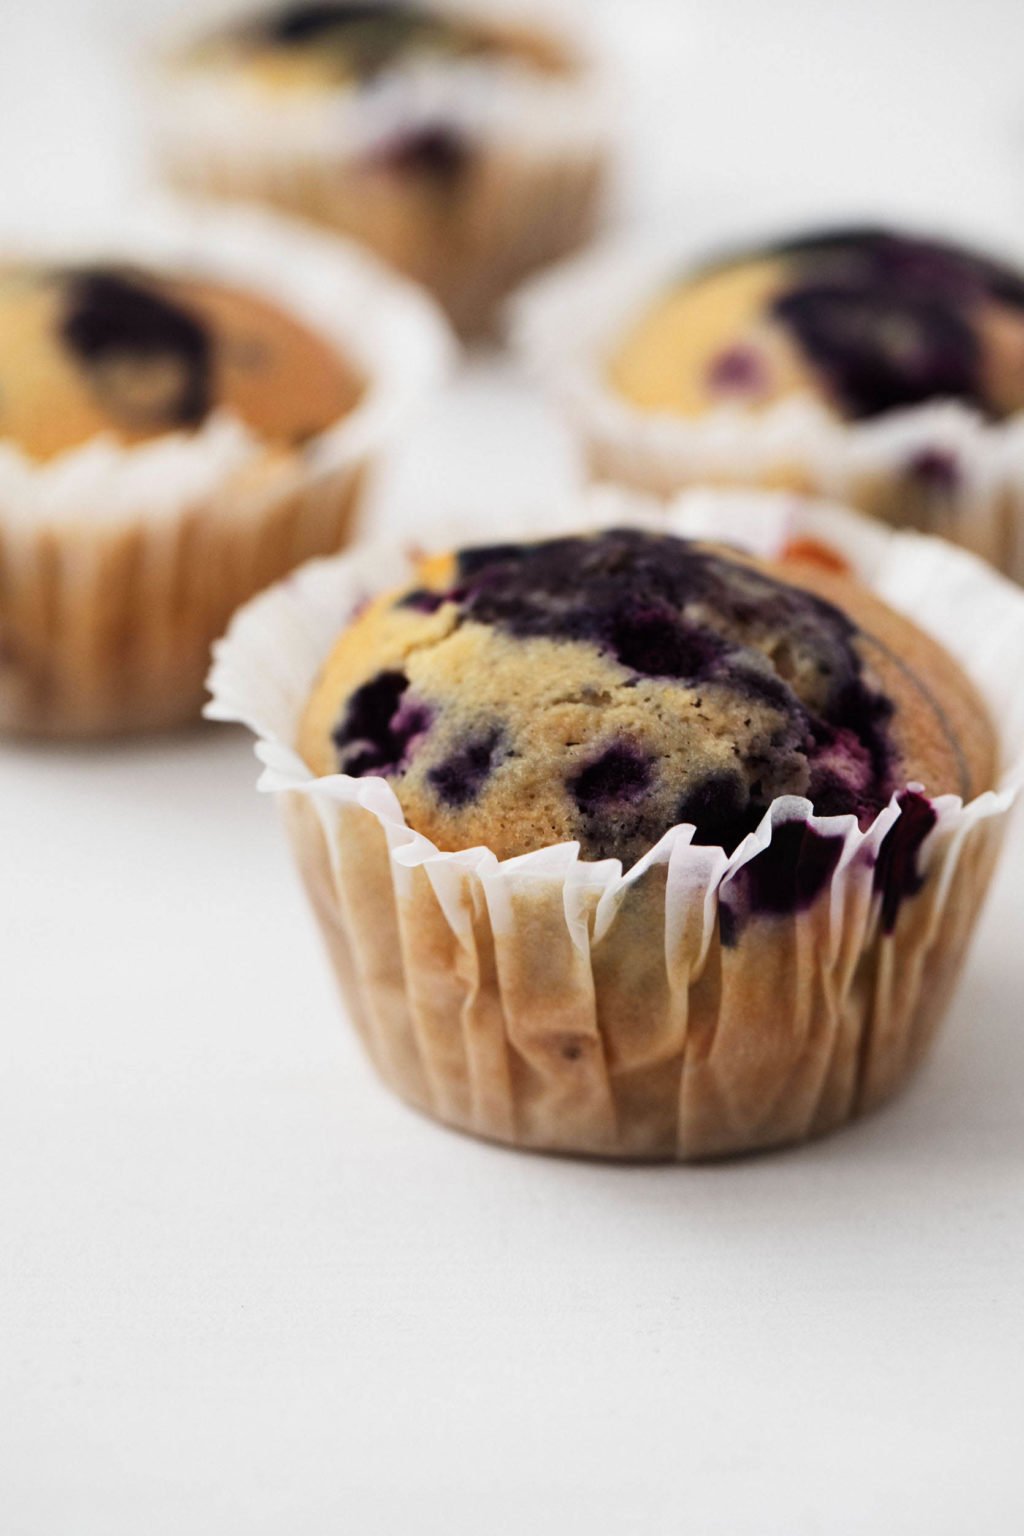 A few corn muffins, filled with juicy blueberries, are resting in muffin liners on a white surface.